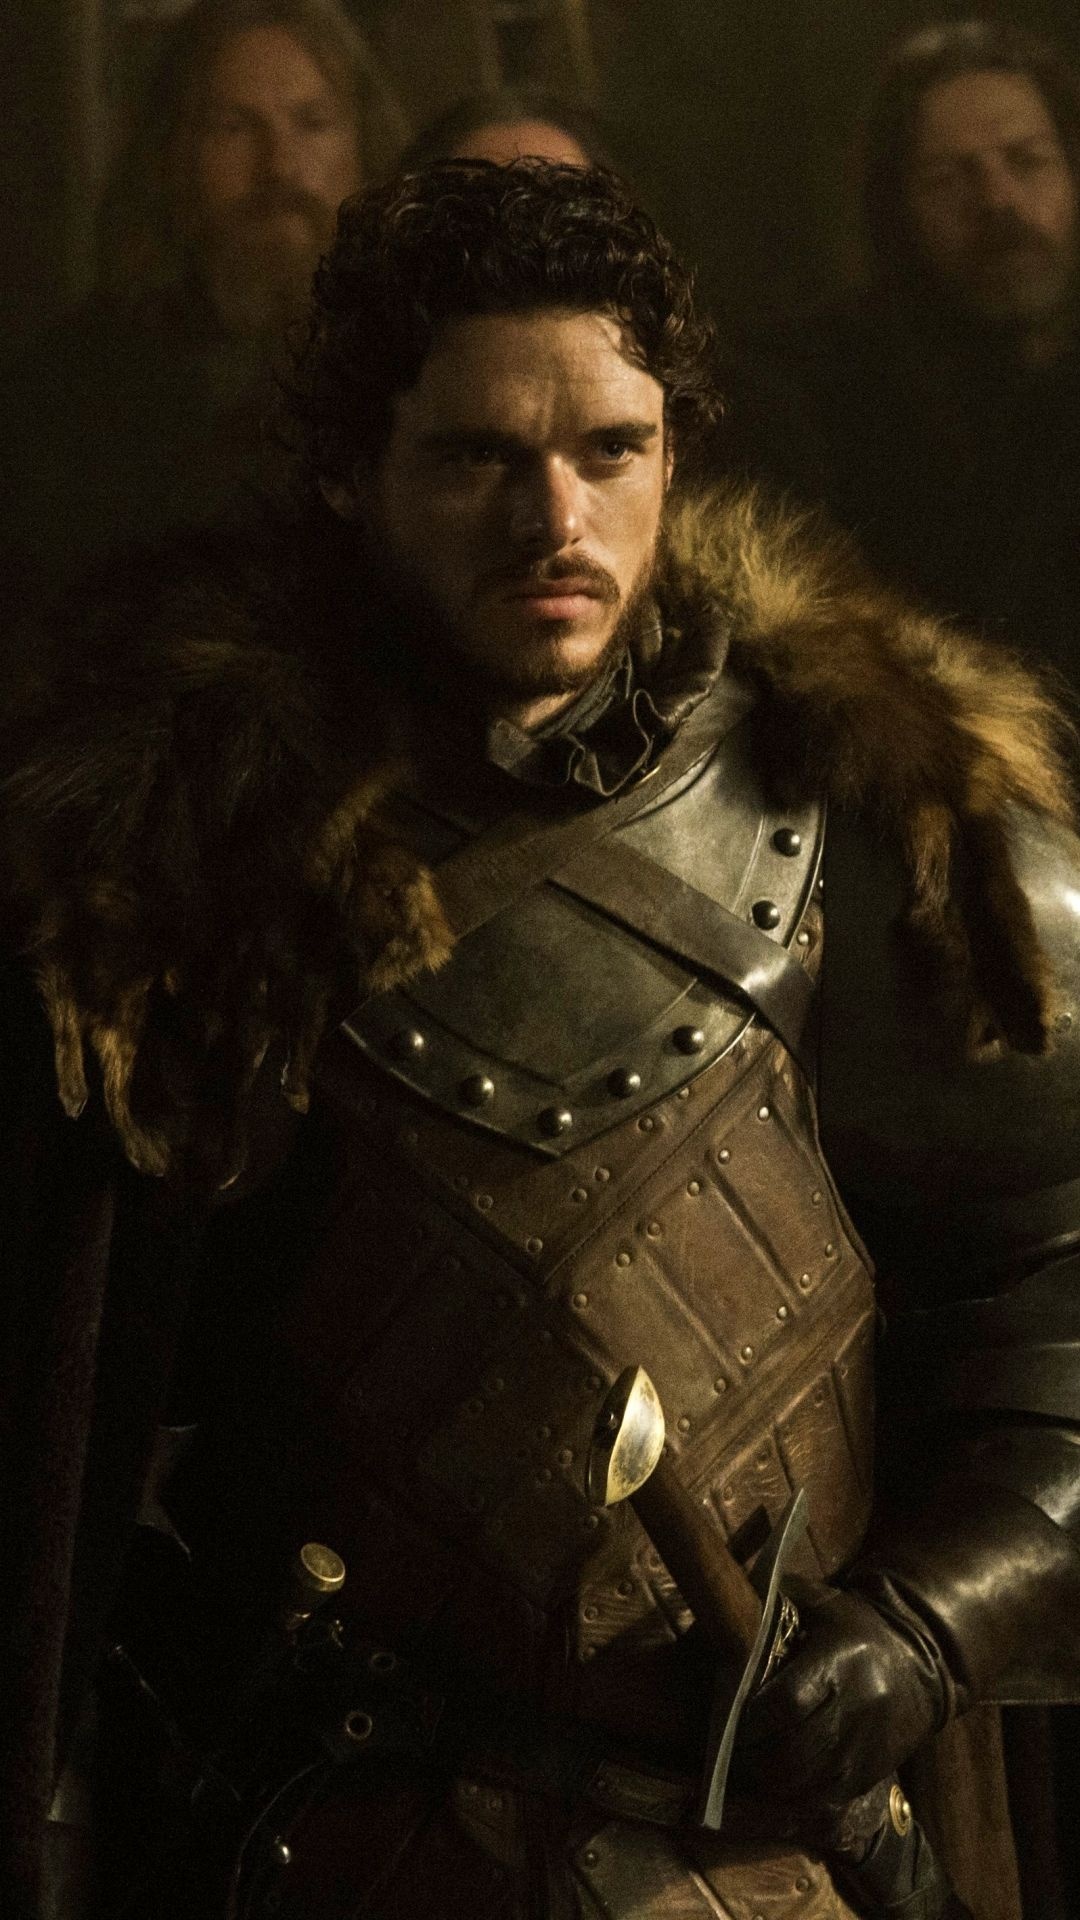 Richard Madden: The heir of House Stark to Winterfell and the north. 1080x1920 Full HD Wallpaper.